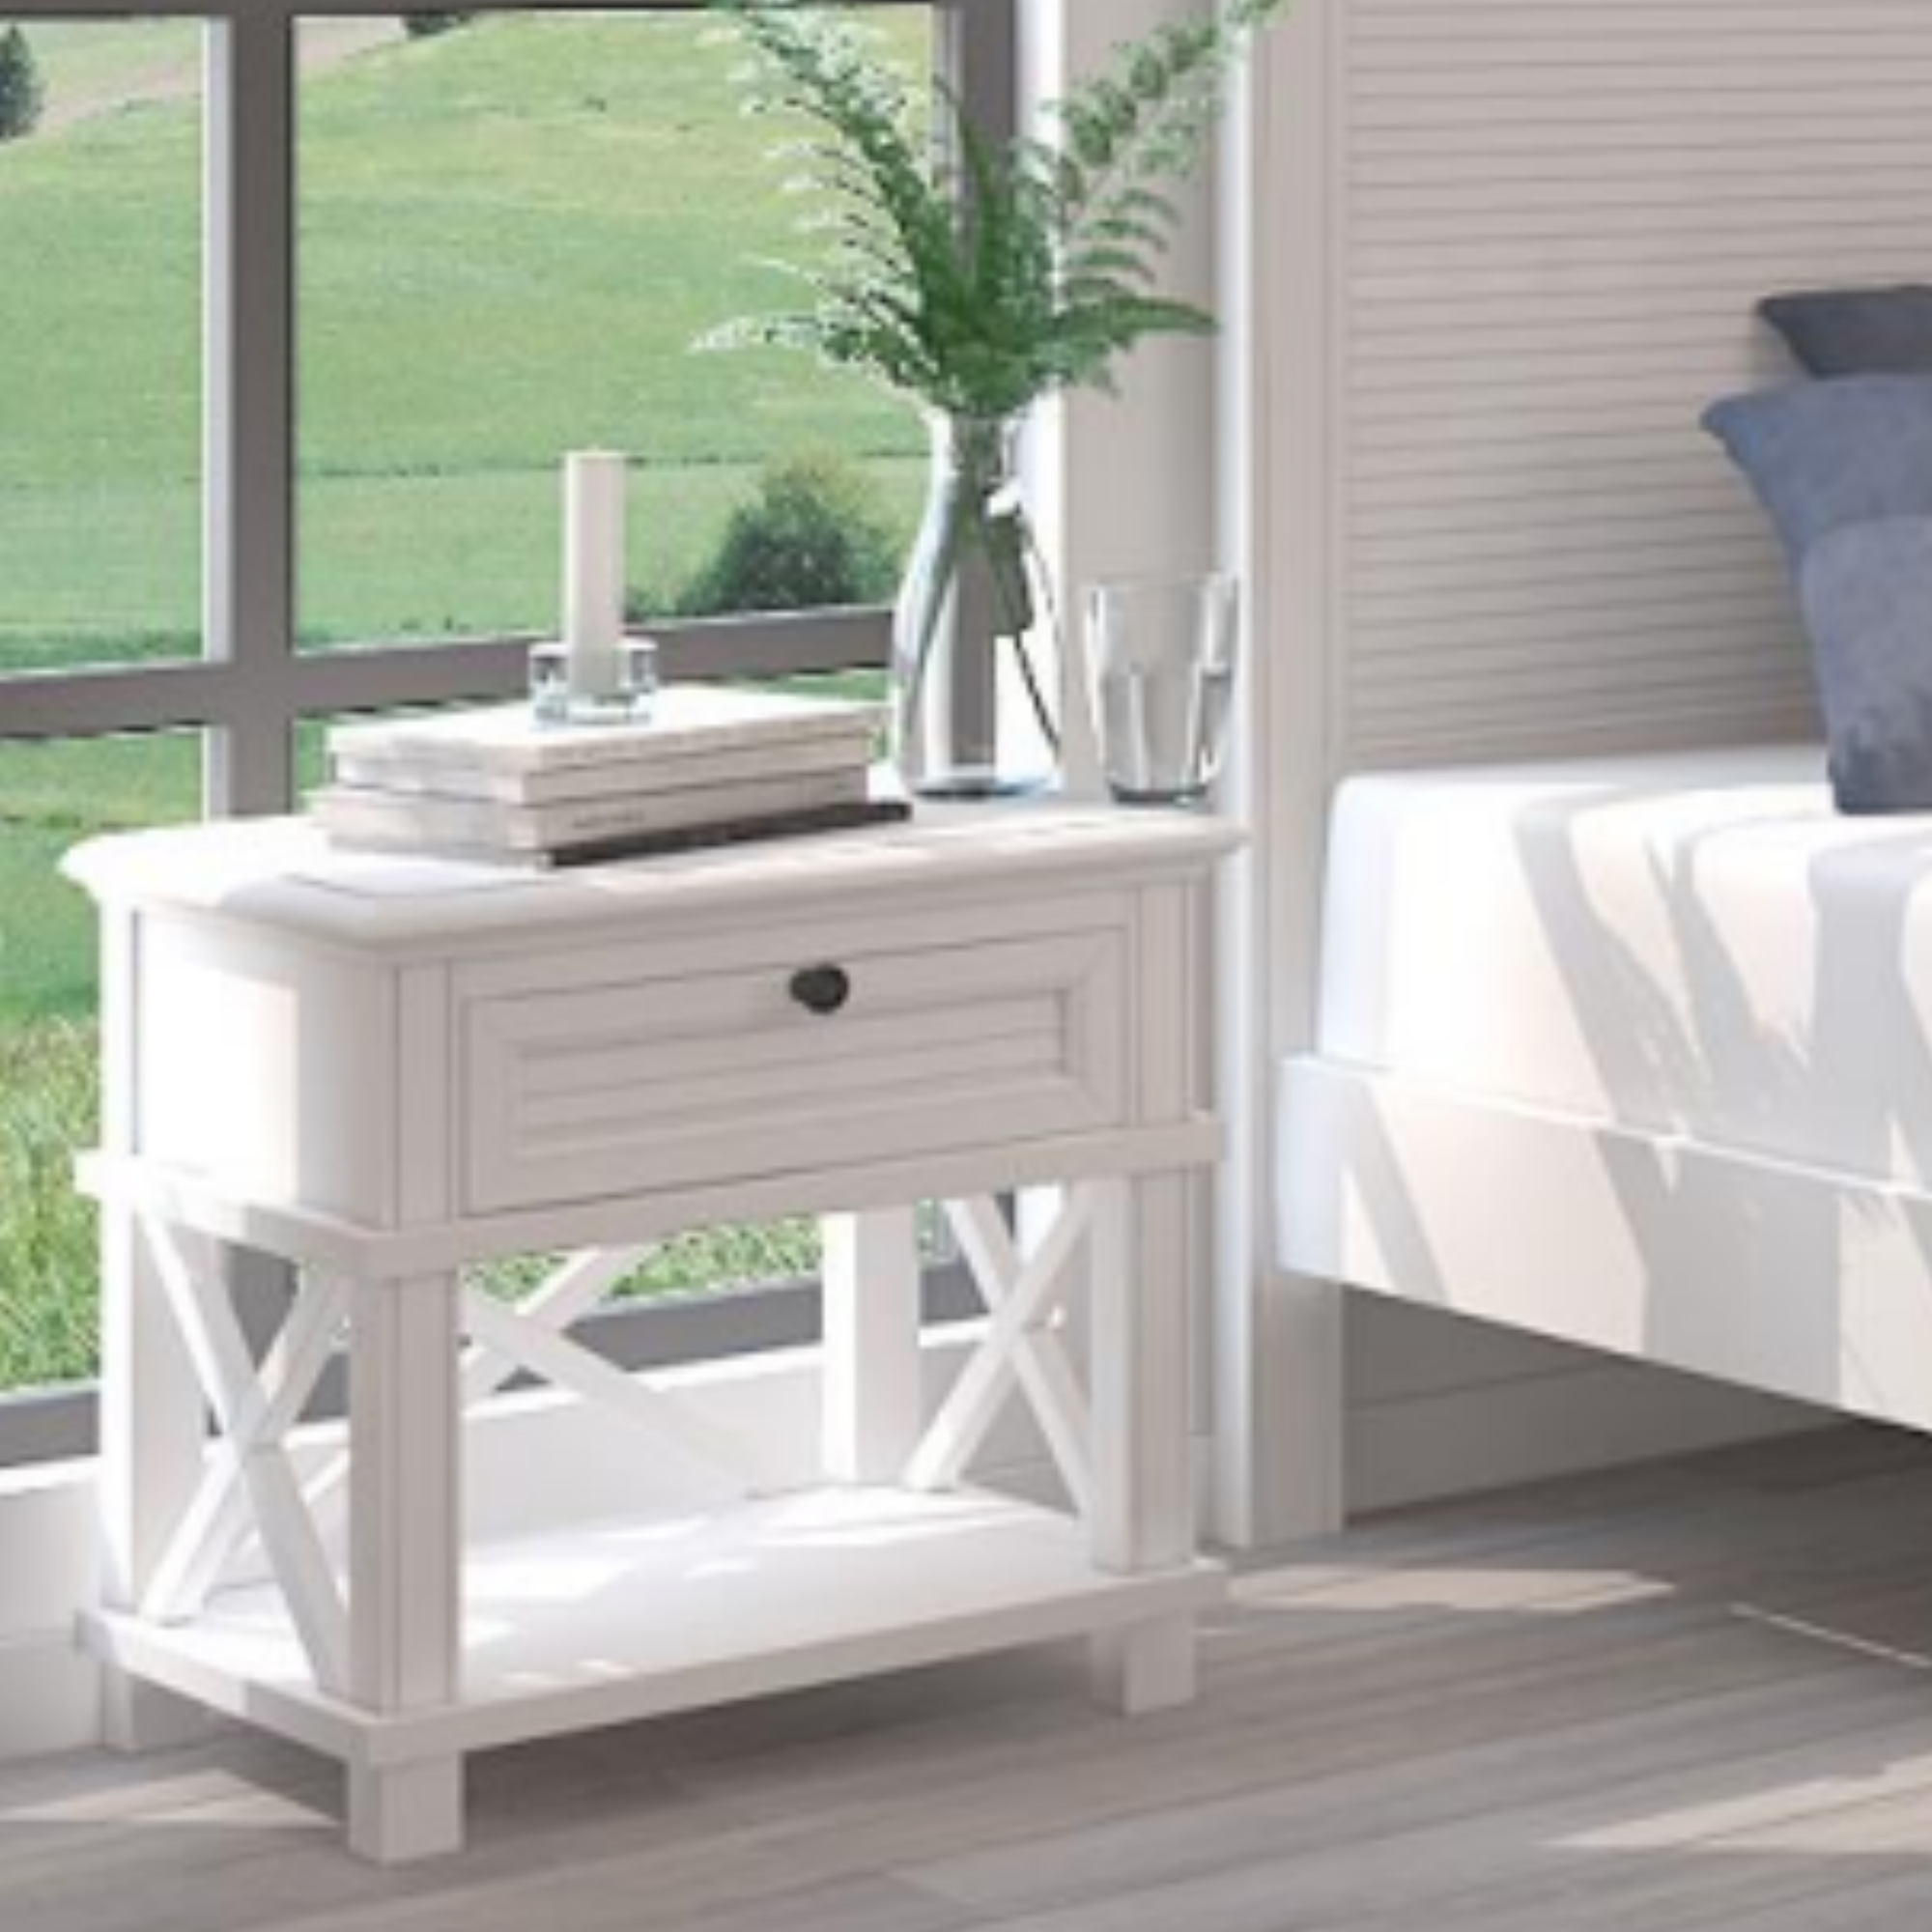 SINTRA HAMPTON STYLE BEDSIDE CABINET WITH DRAWER & SHELF